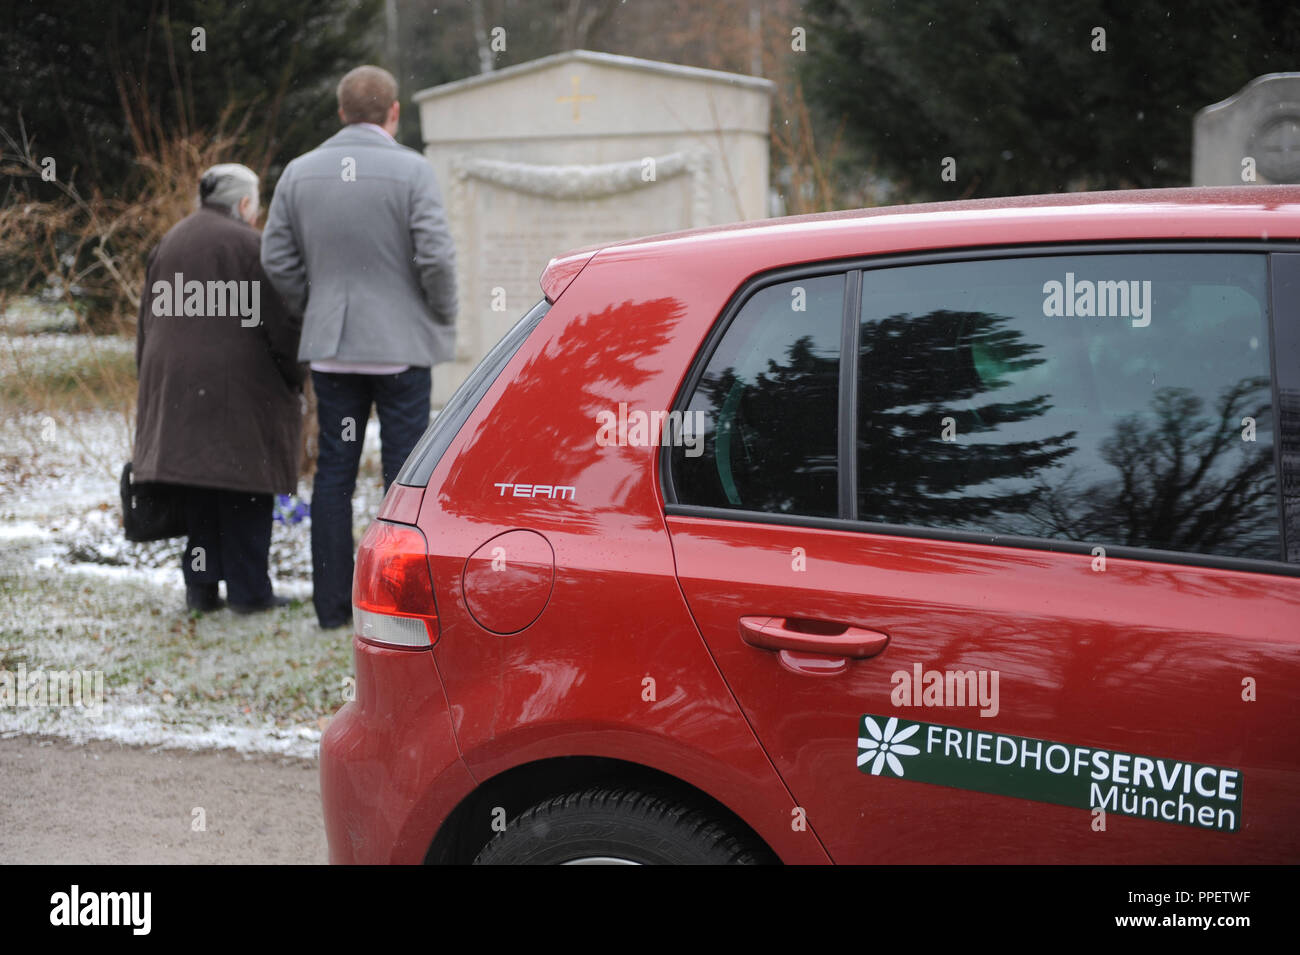 The free cemetery chauffeur service of the Munich-based company 'Vispiron' takes elderly people to the place where their relatives are buried free of charge. Stock Photo